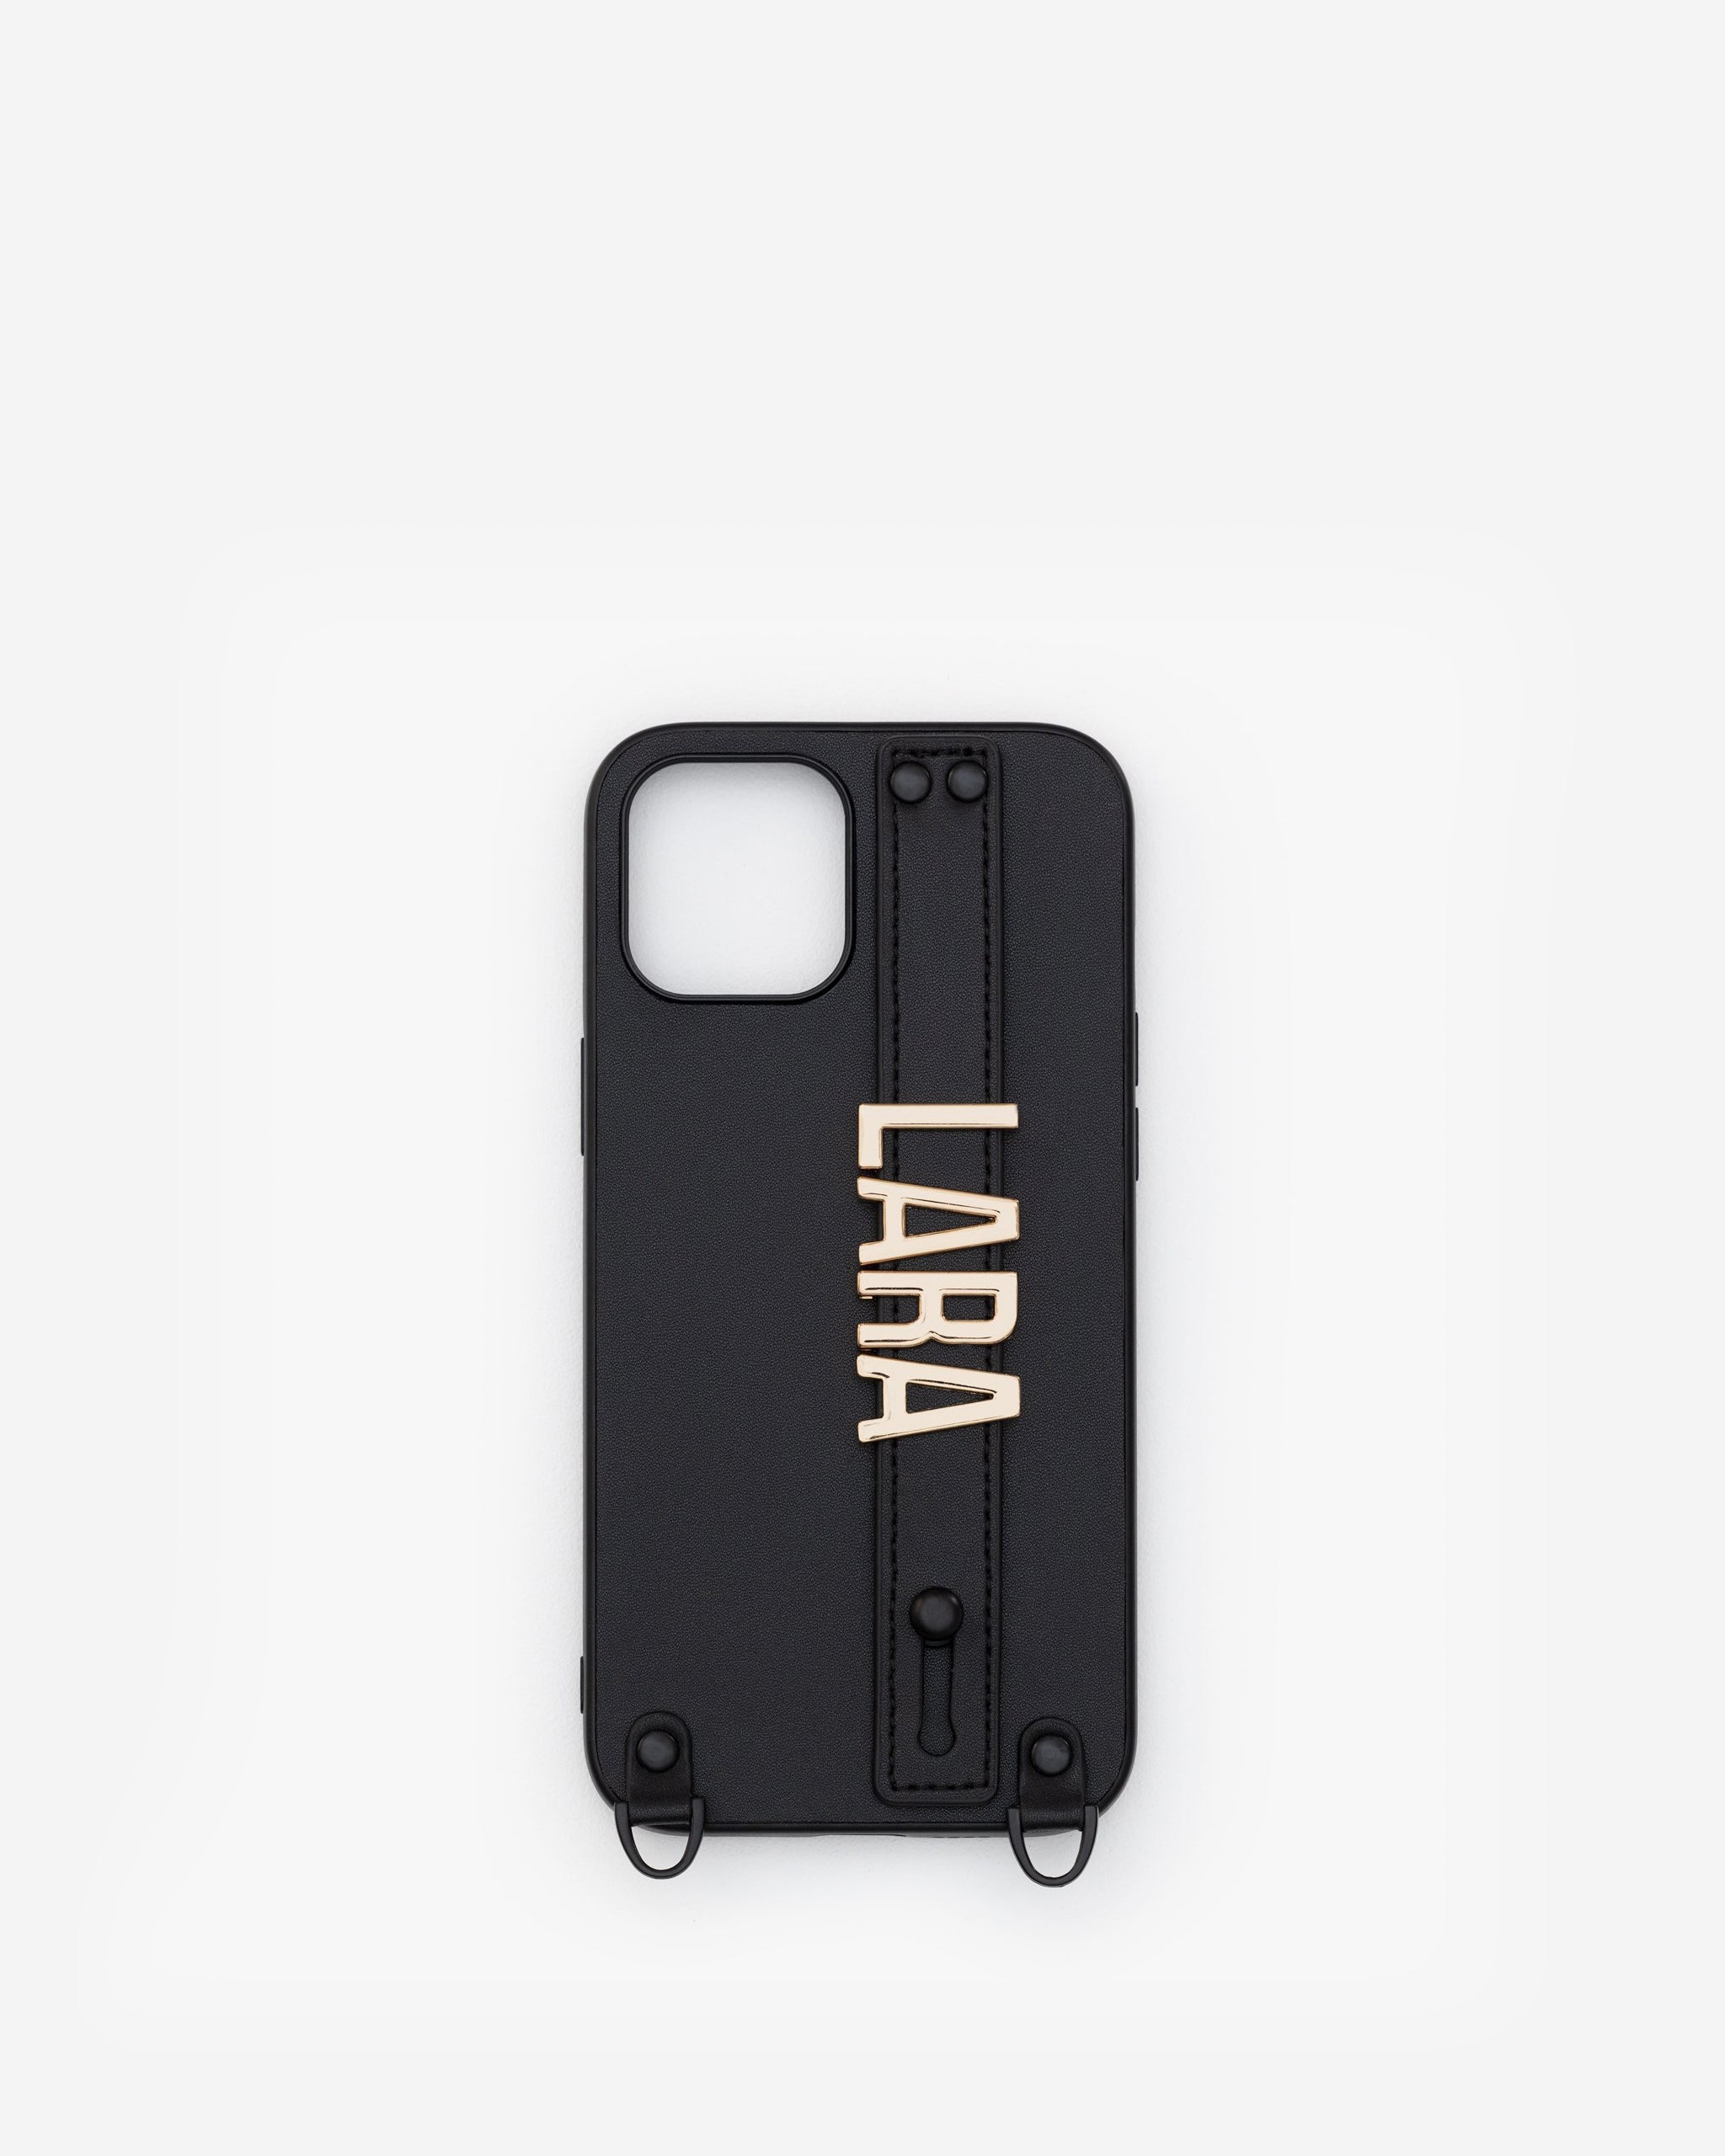 iPhone 12 Pro Max Case in Black/Gold with Personalised Hardware